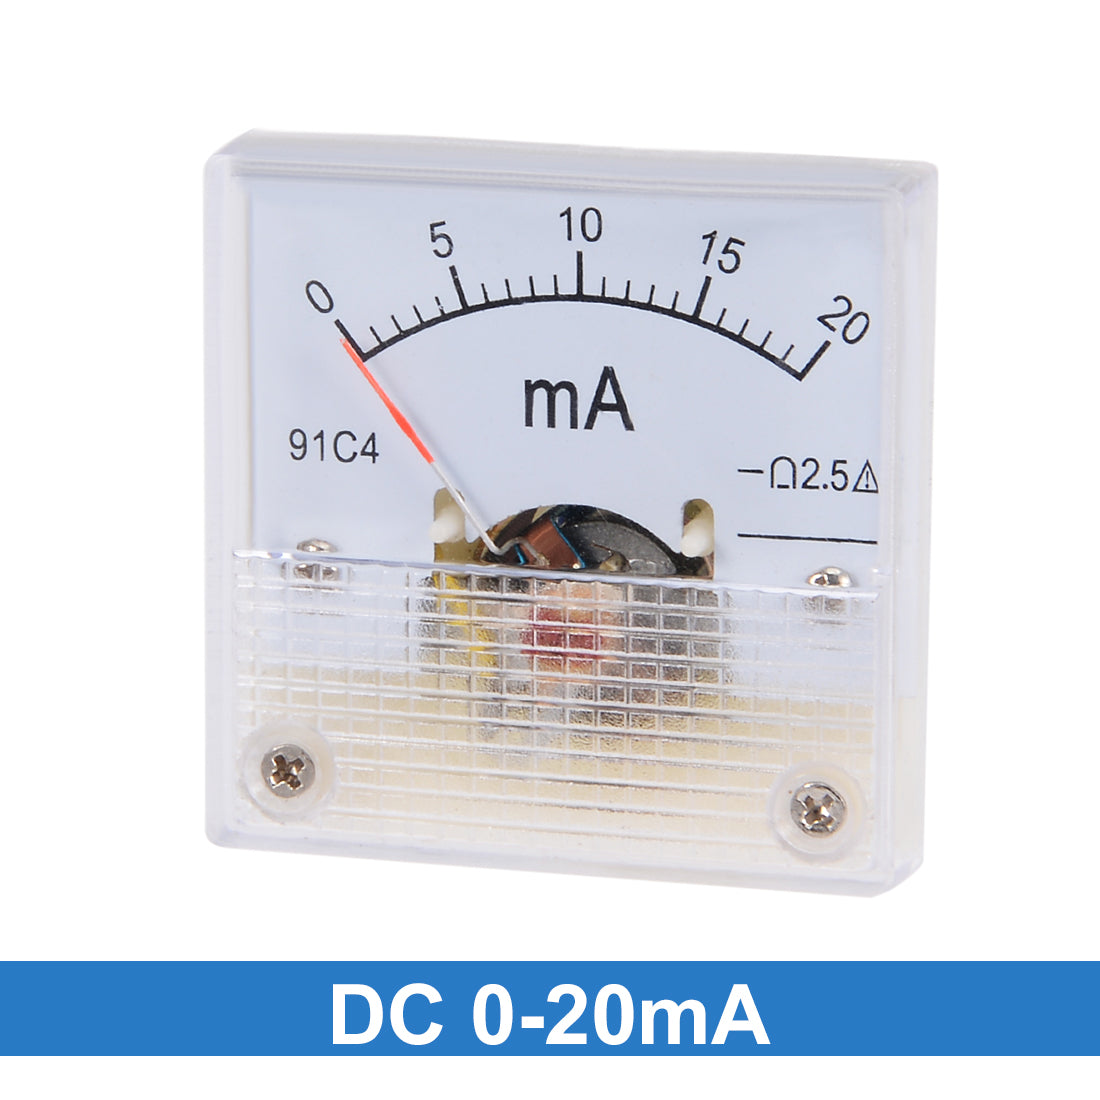 uxcell Uxcell 91C4-A Analog Current Panel Meter DC 20mA Ammeter for Circuit Testing Ampere Tester Gauge 1 PCS